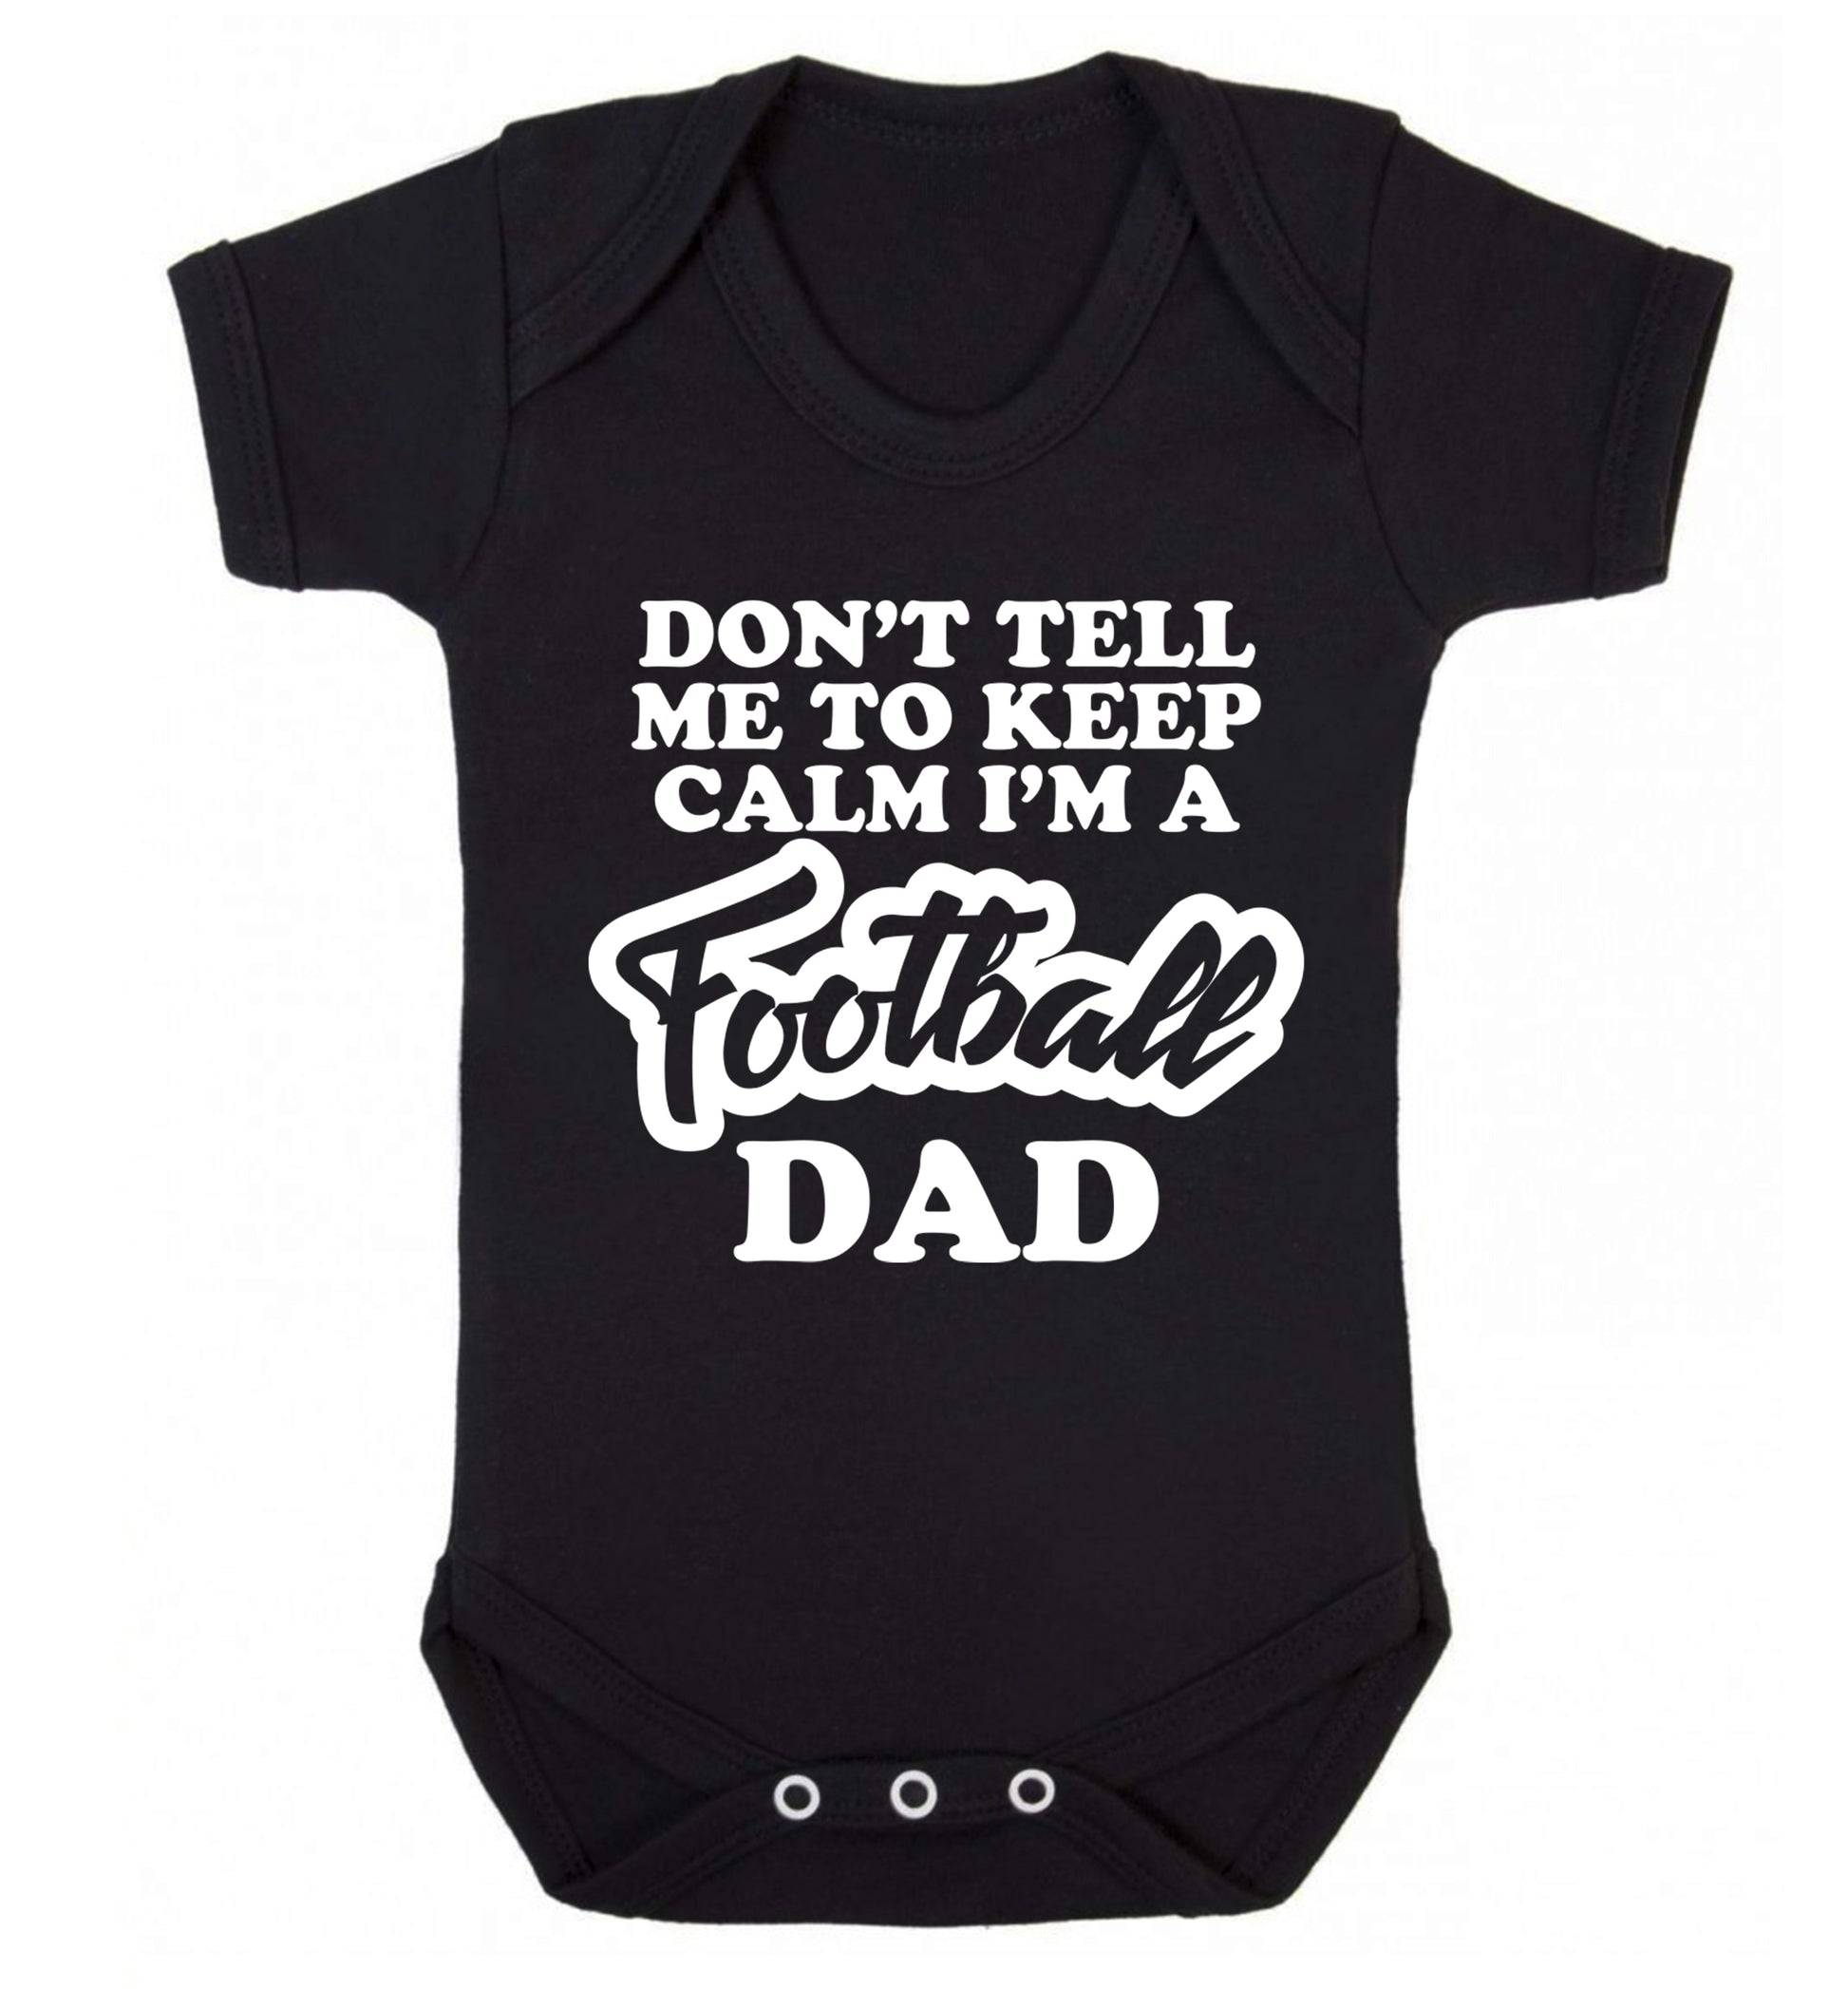 Don't tell me to keep calm I'm a football grandad Baby Vest black 18-24 months